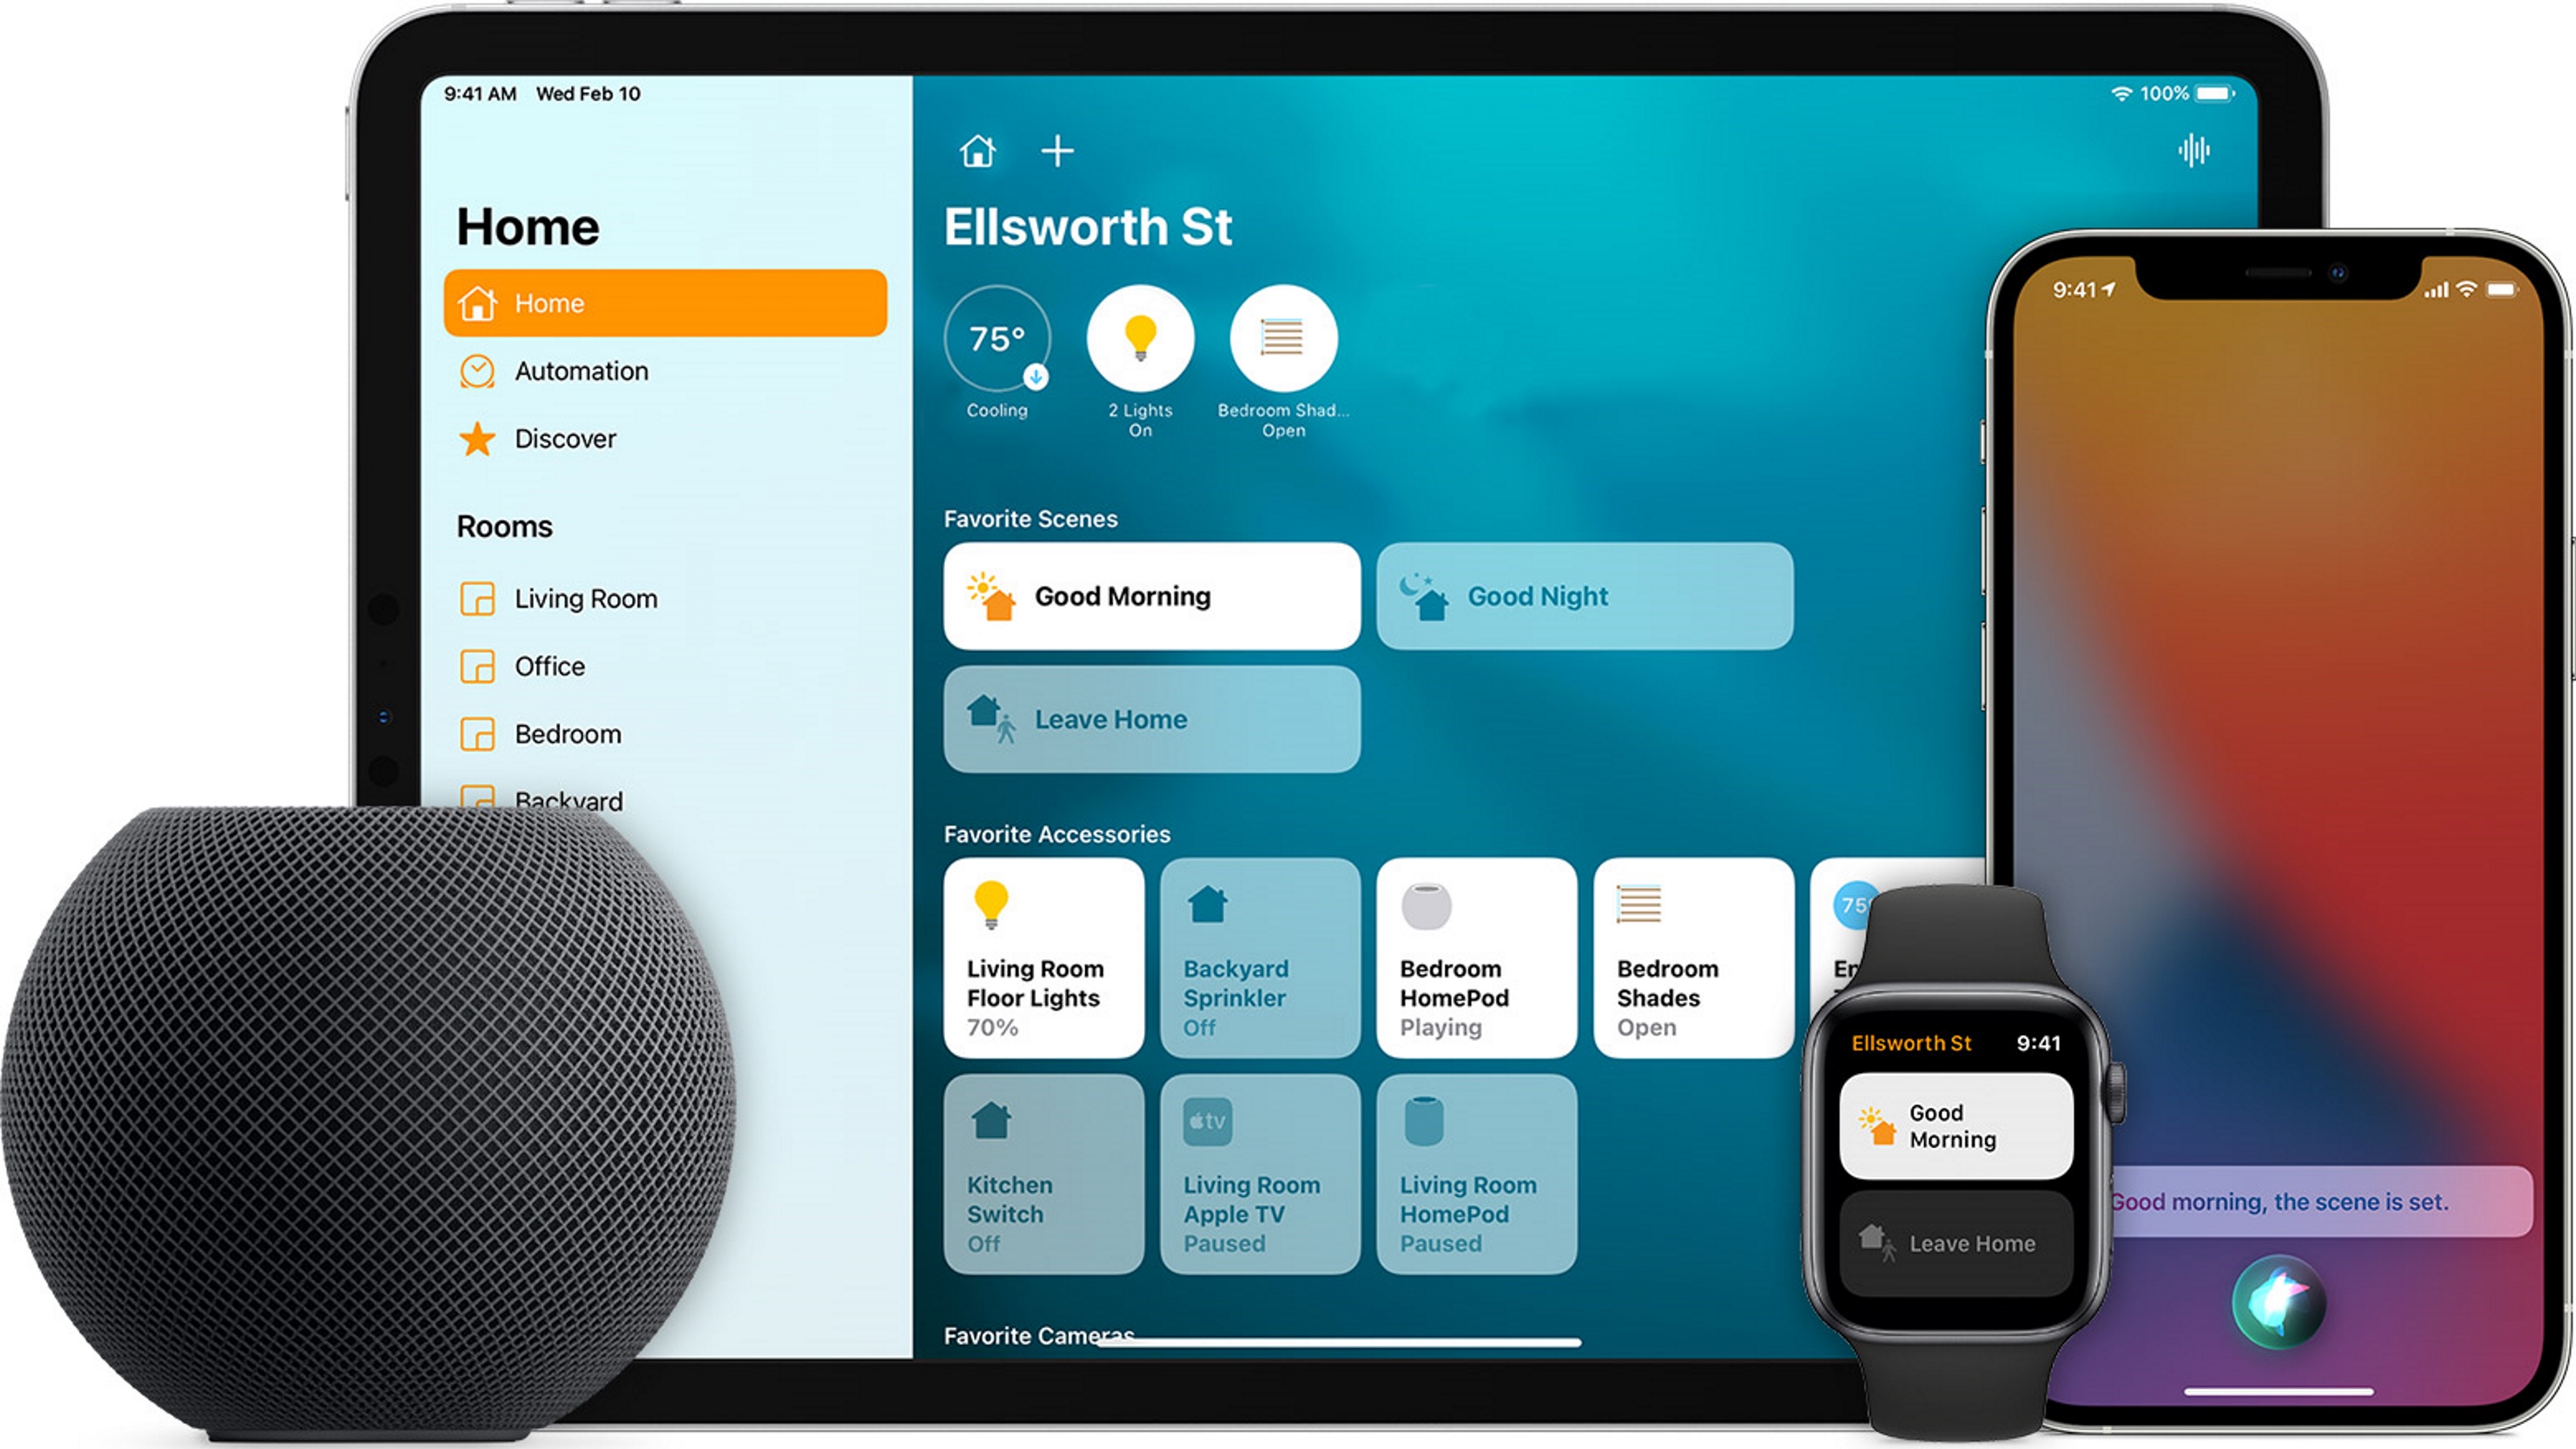 Mi Home Debut Smart Control Centre Device - Homekit News and Reviews